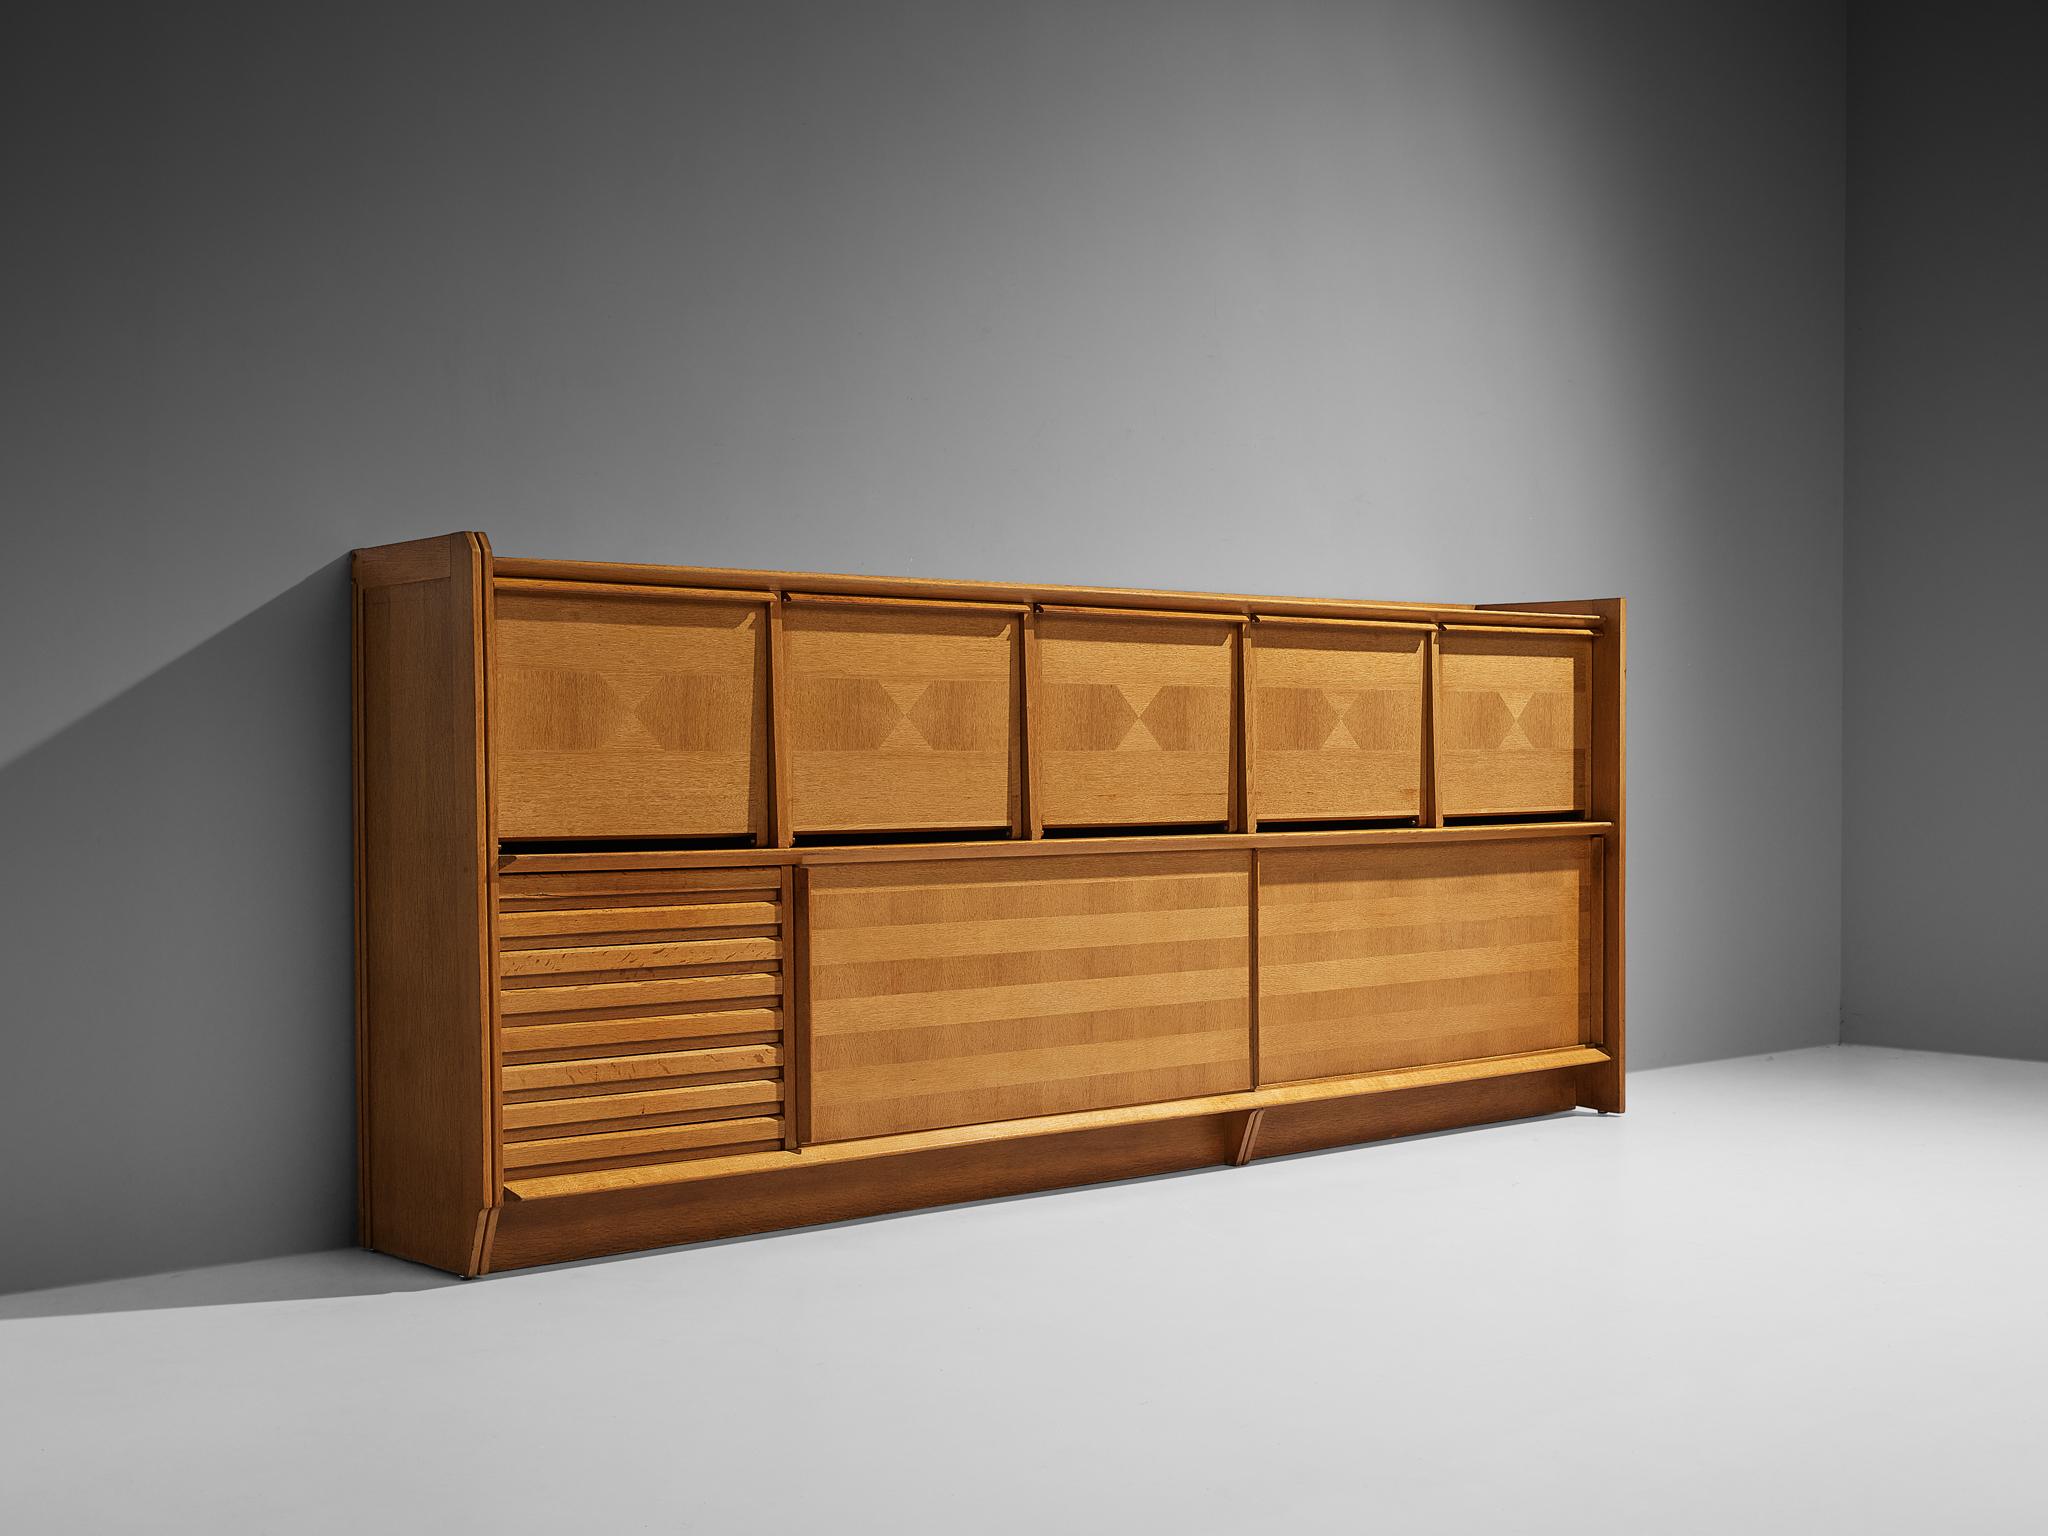 Guillerme et Chambron for Votre Maison, large sideboard, oak, France, 1960s. 

This exceptionally large sideboard designed by French designer duo Guillerme et Chambron is truly something you cannot easily overlook. With its width of 11,5 feet, this